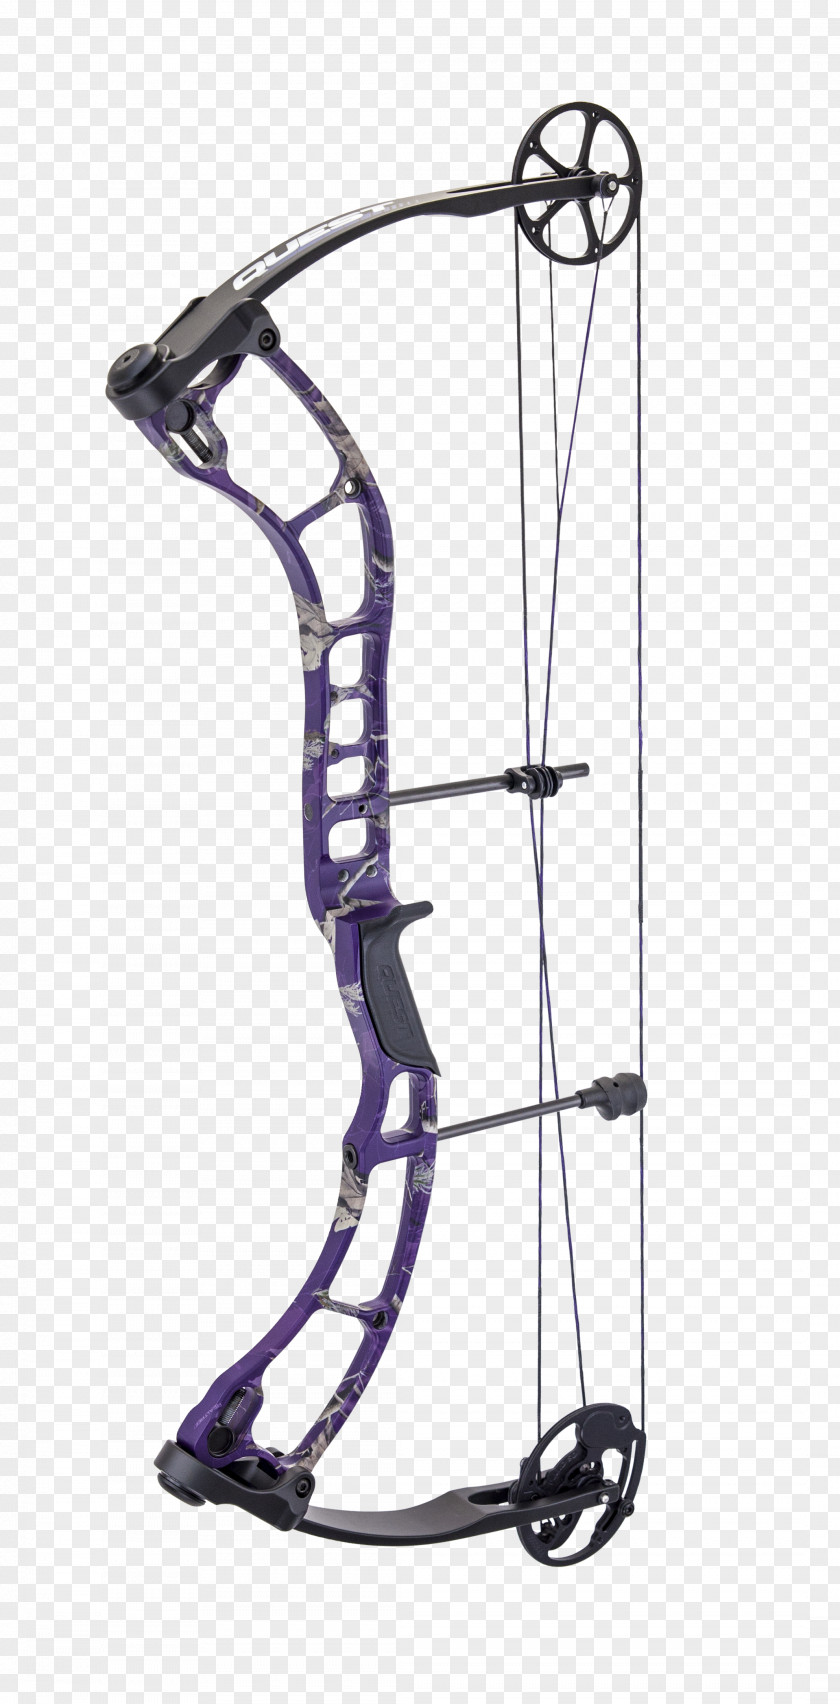 Youth Archery Bows Bow And Arrow Compound G5 Outdoors Hunting PNG